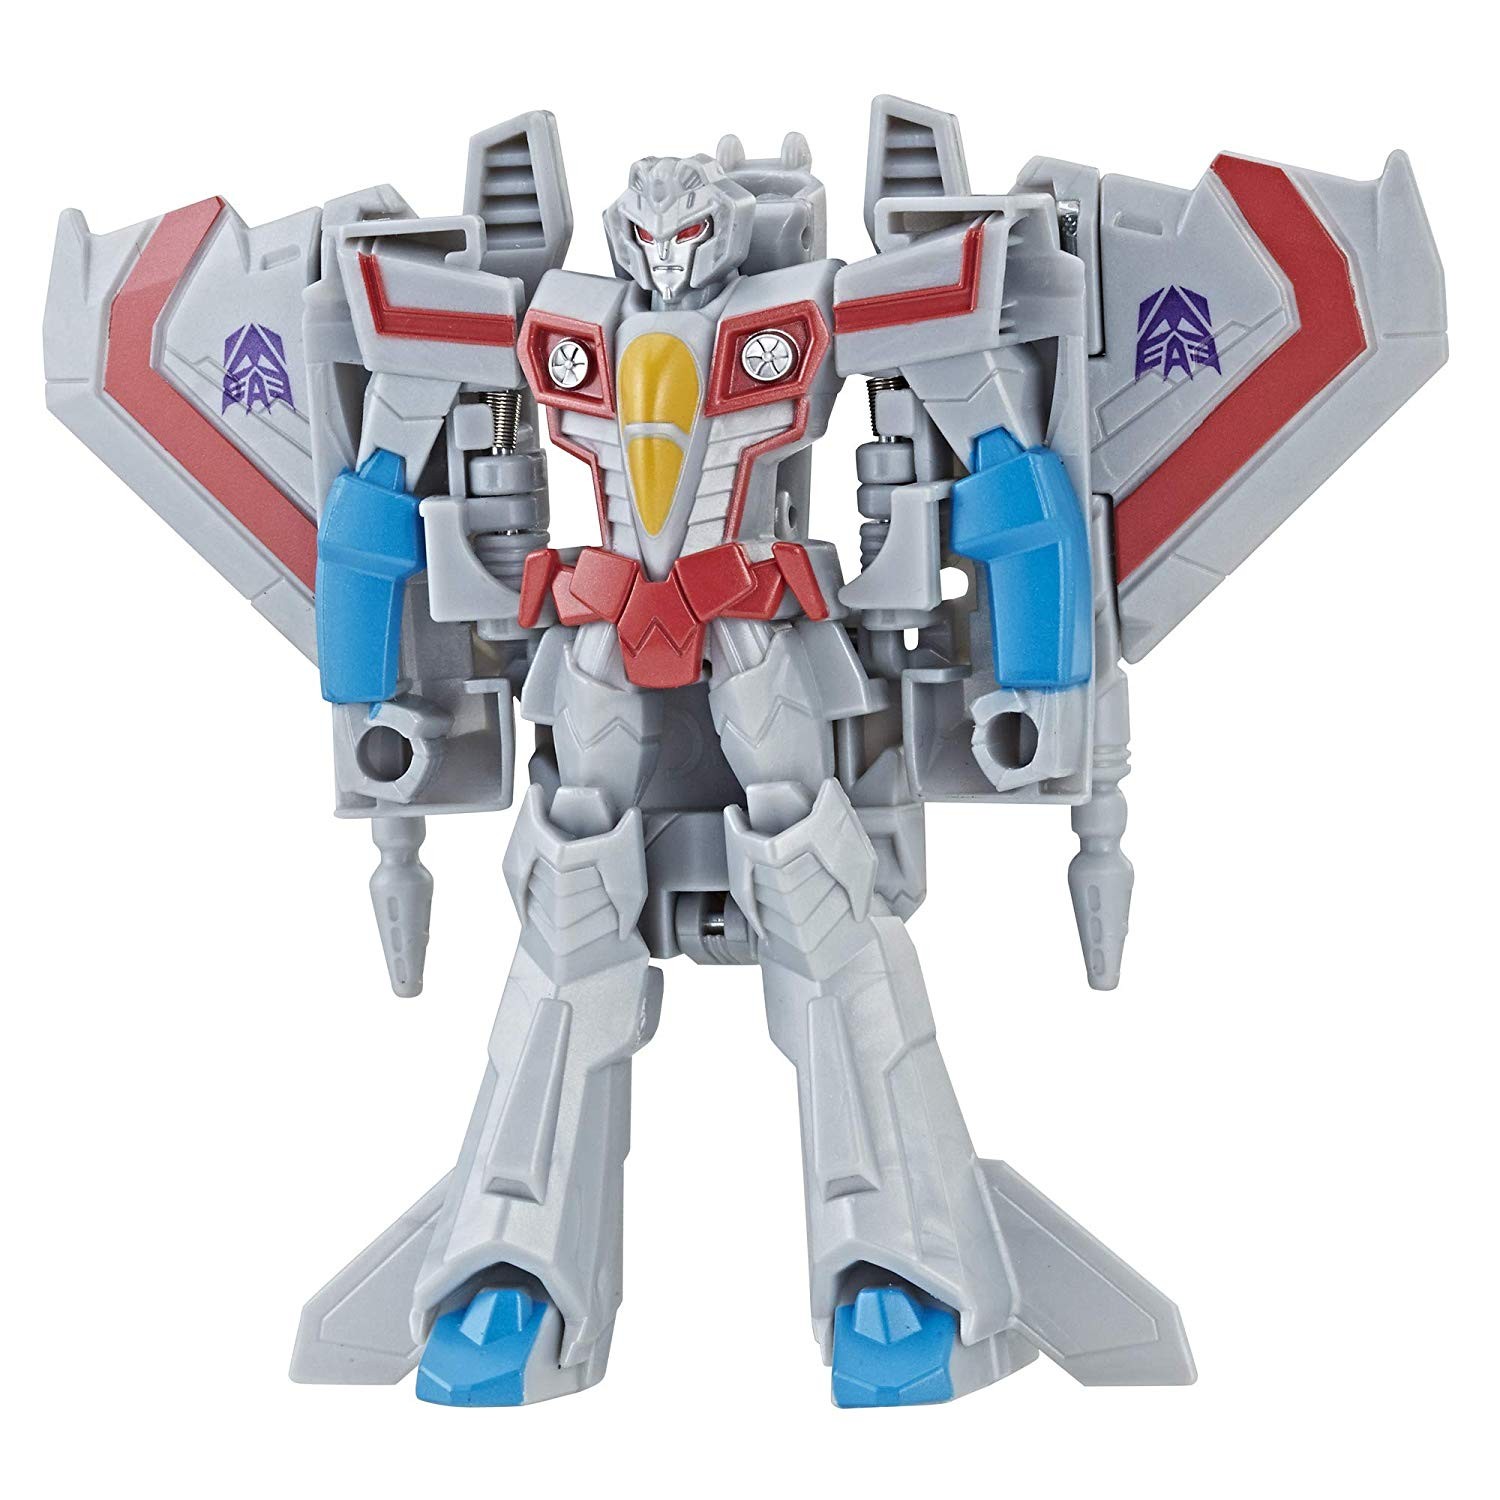 Transformers News: Transformers MPM Ironhide and Cyberverse Wave 2 One Steps Available for Pre-Order on Amazon